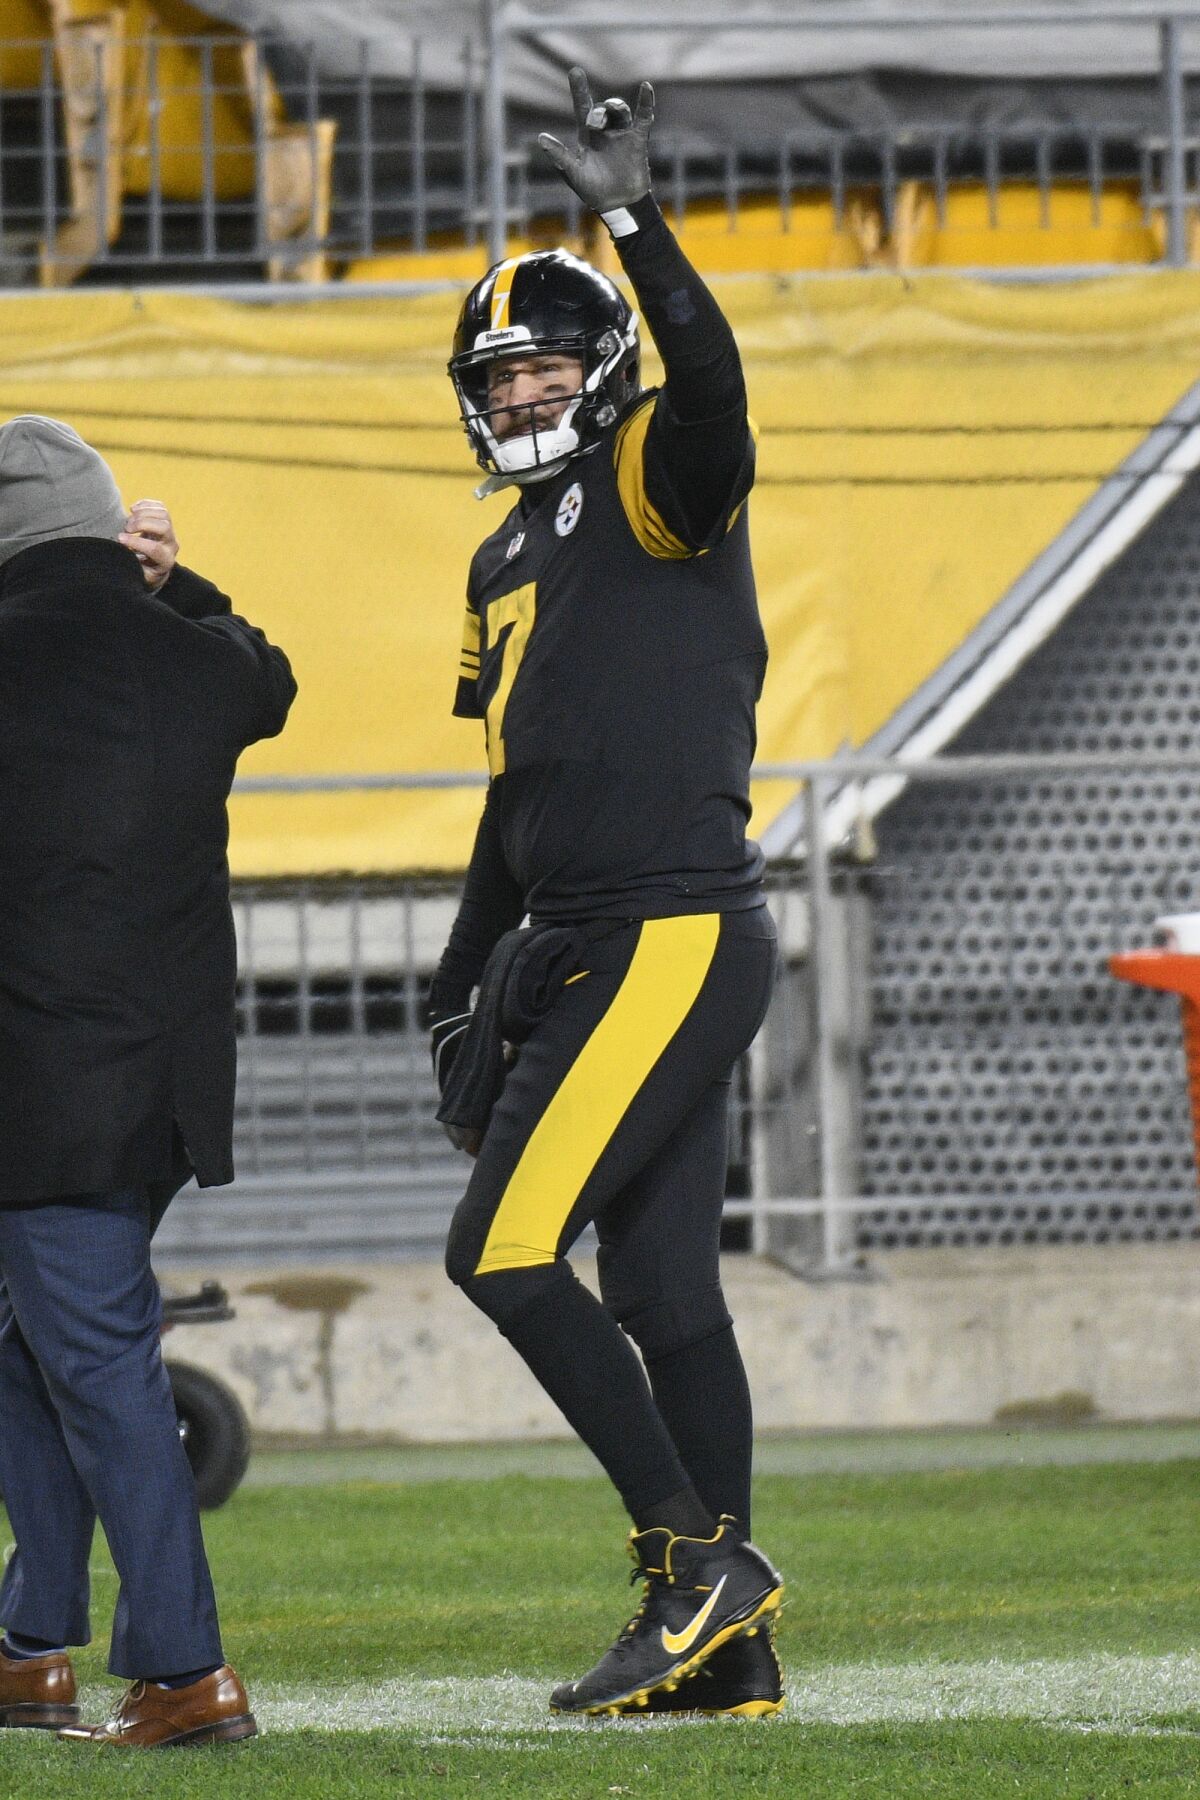 Pittsburgh Steelers quarterback Ben Roethlisberger (7) waves as he leaves the field after defeating the Baltimore Ravens in an NFL football game, Wednesday, Dec. 2, 2020, in Pittsburgh. The Steelers won 19-14. (AP Photo/Don Wright)